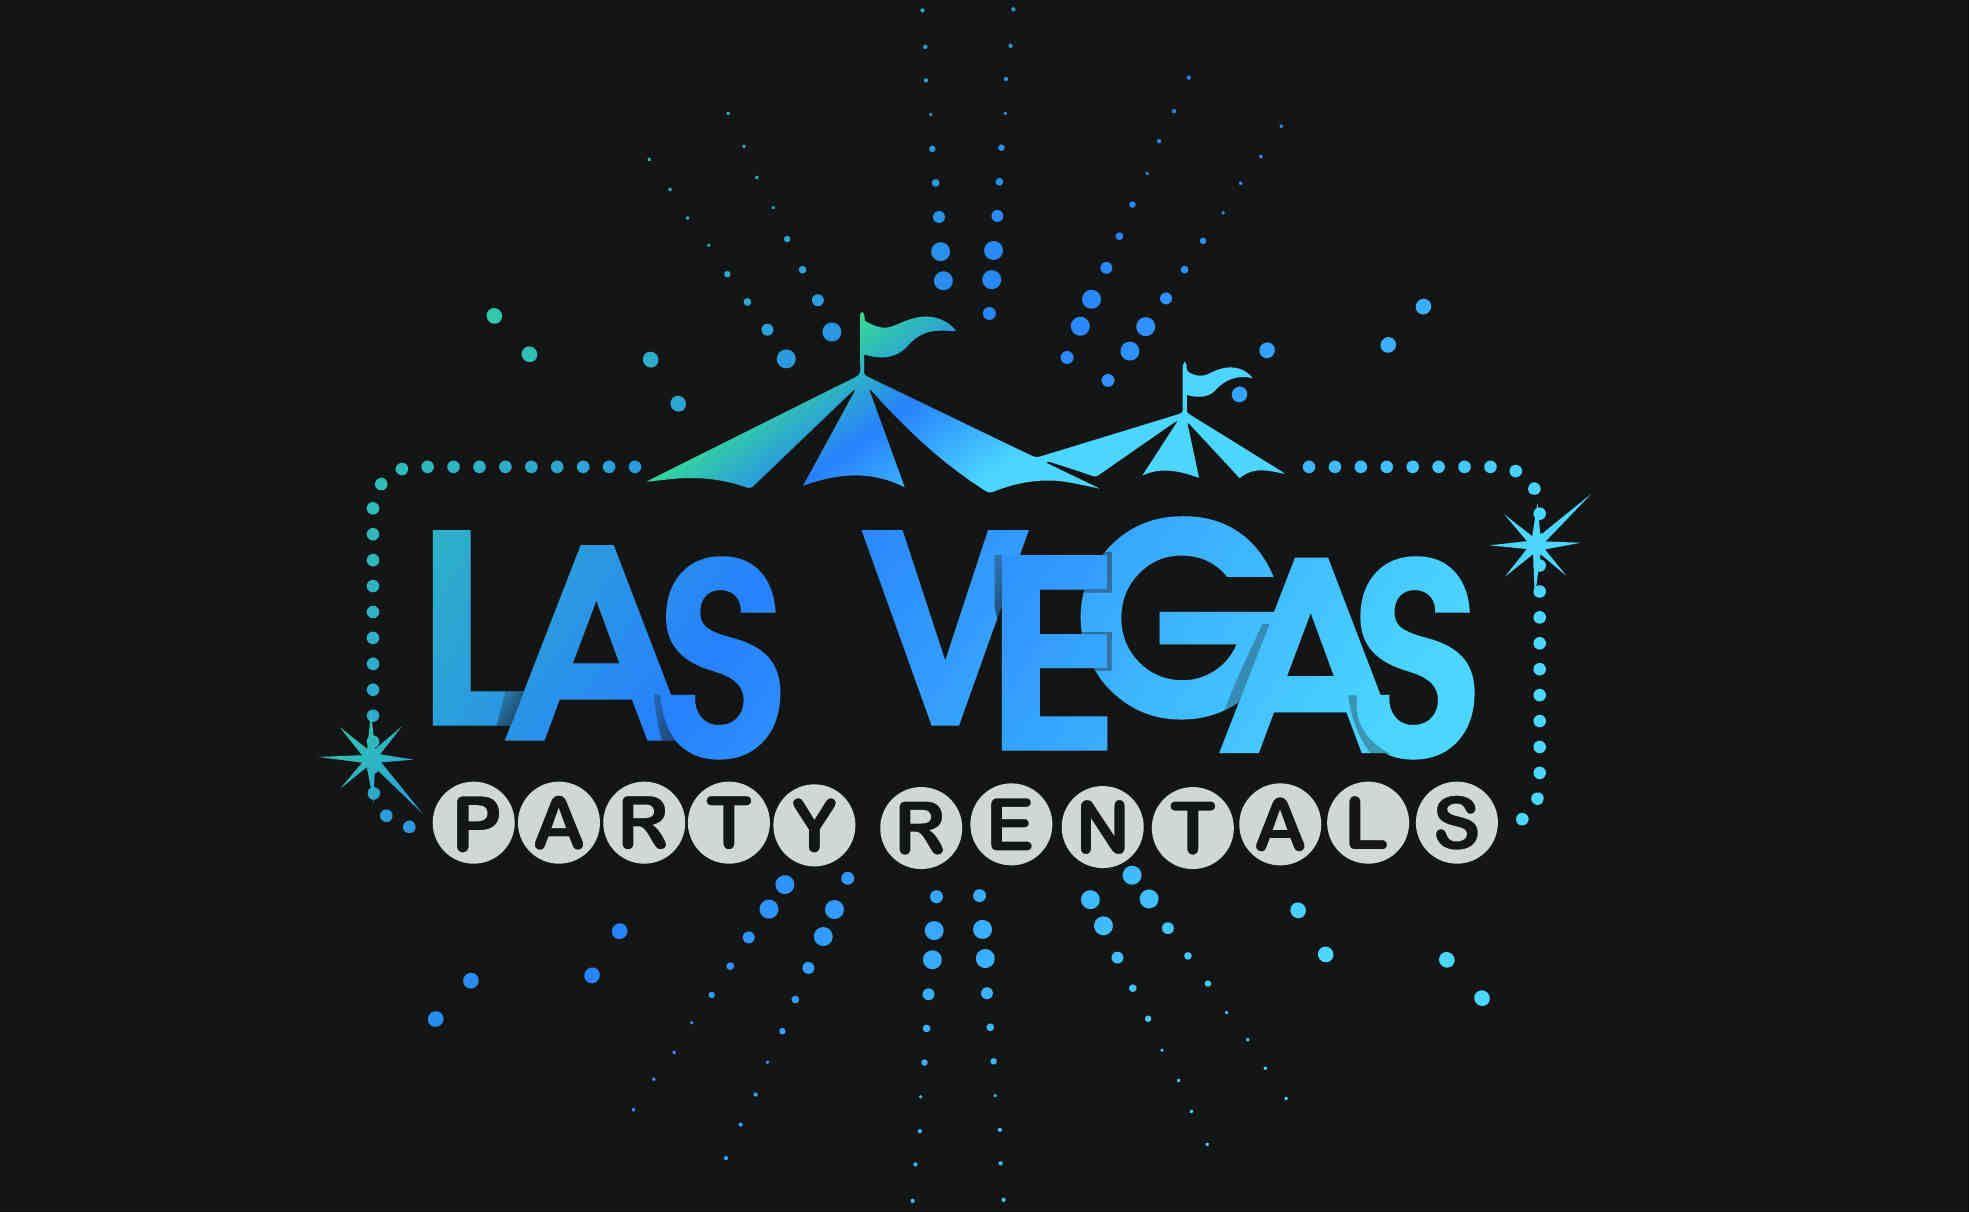 Welcome to Las Vegas Logo - Welcome to Las Vegas Party Rentals Las Vegas For Over 25